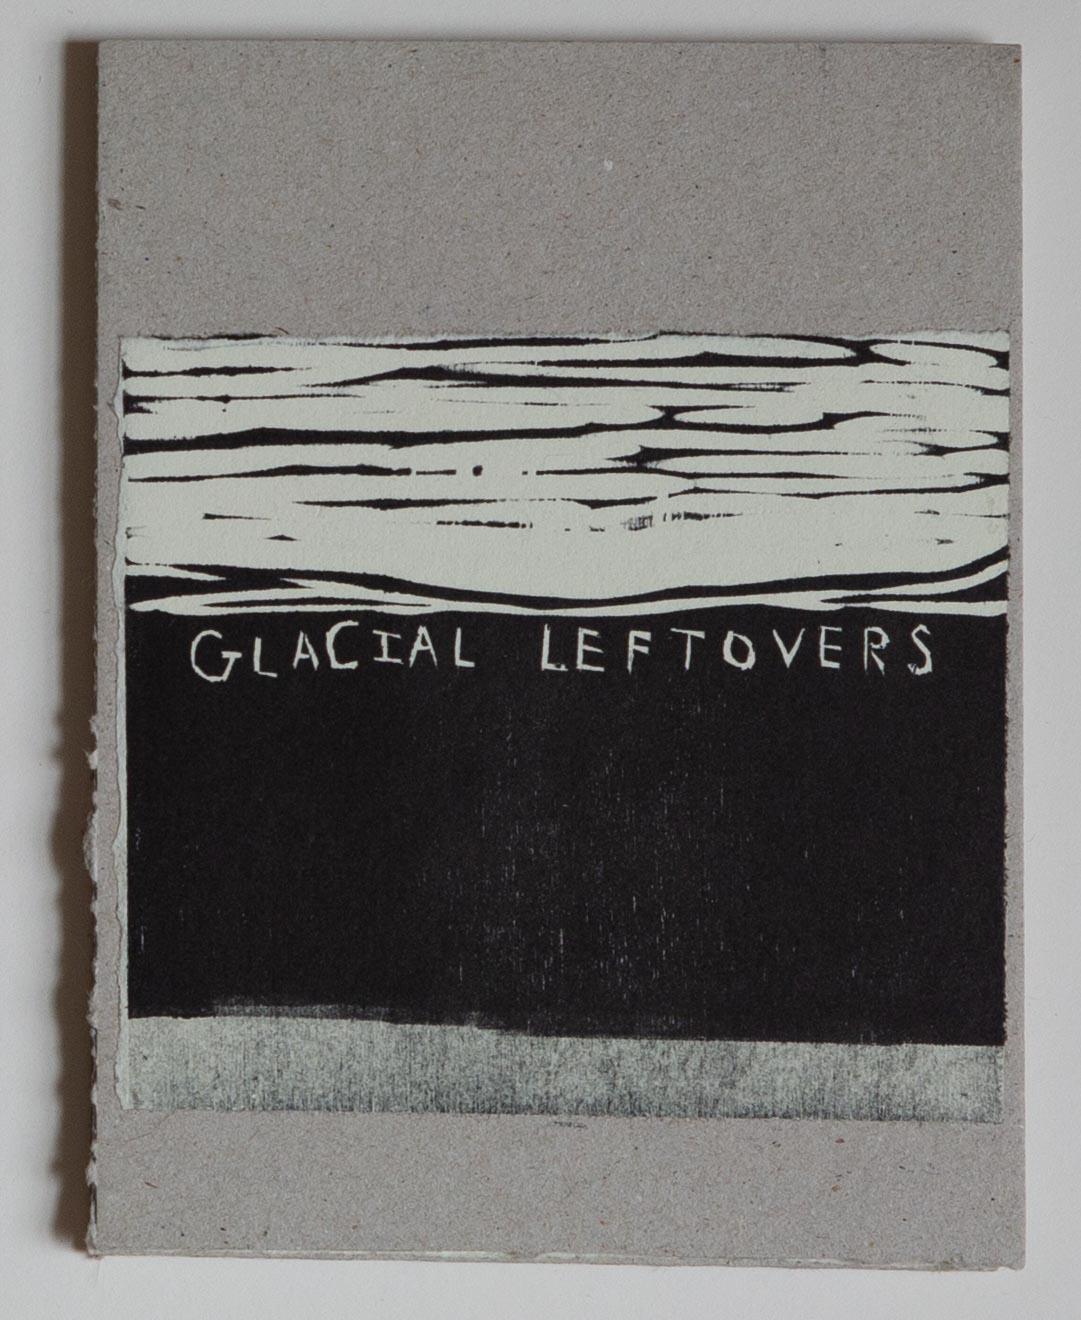 glacial leftovers